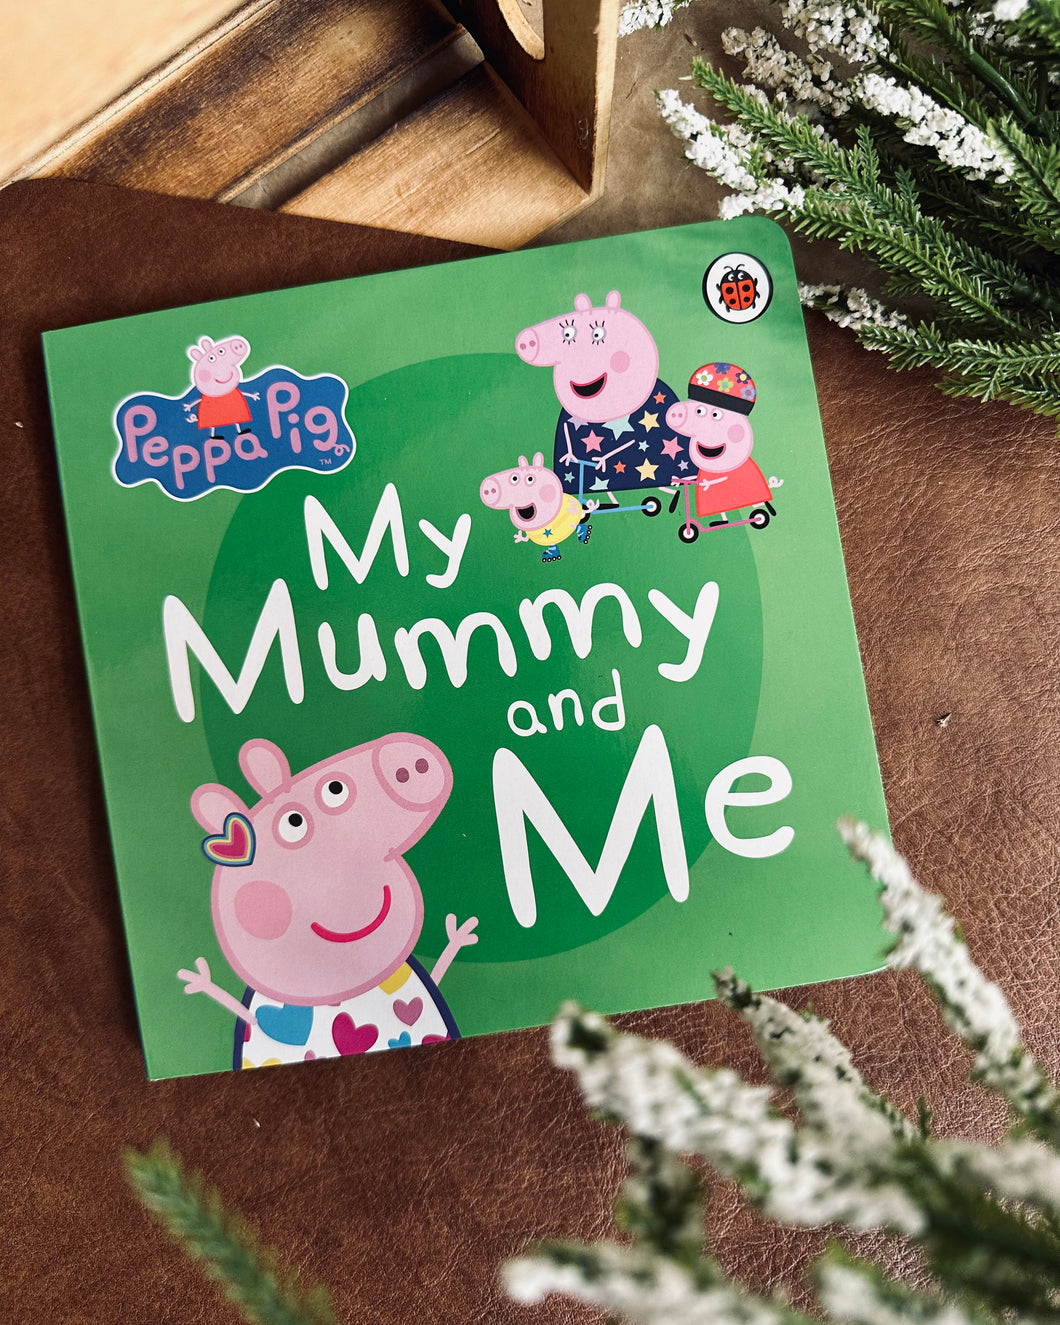 *New* Peppa Pig: My Mummy and Me